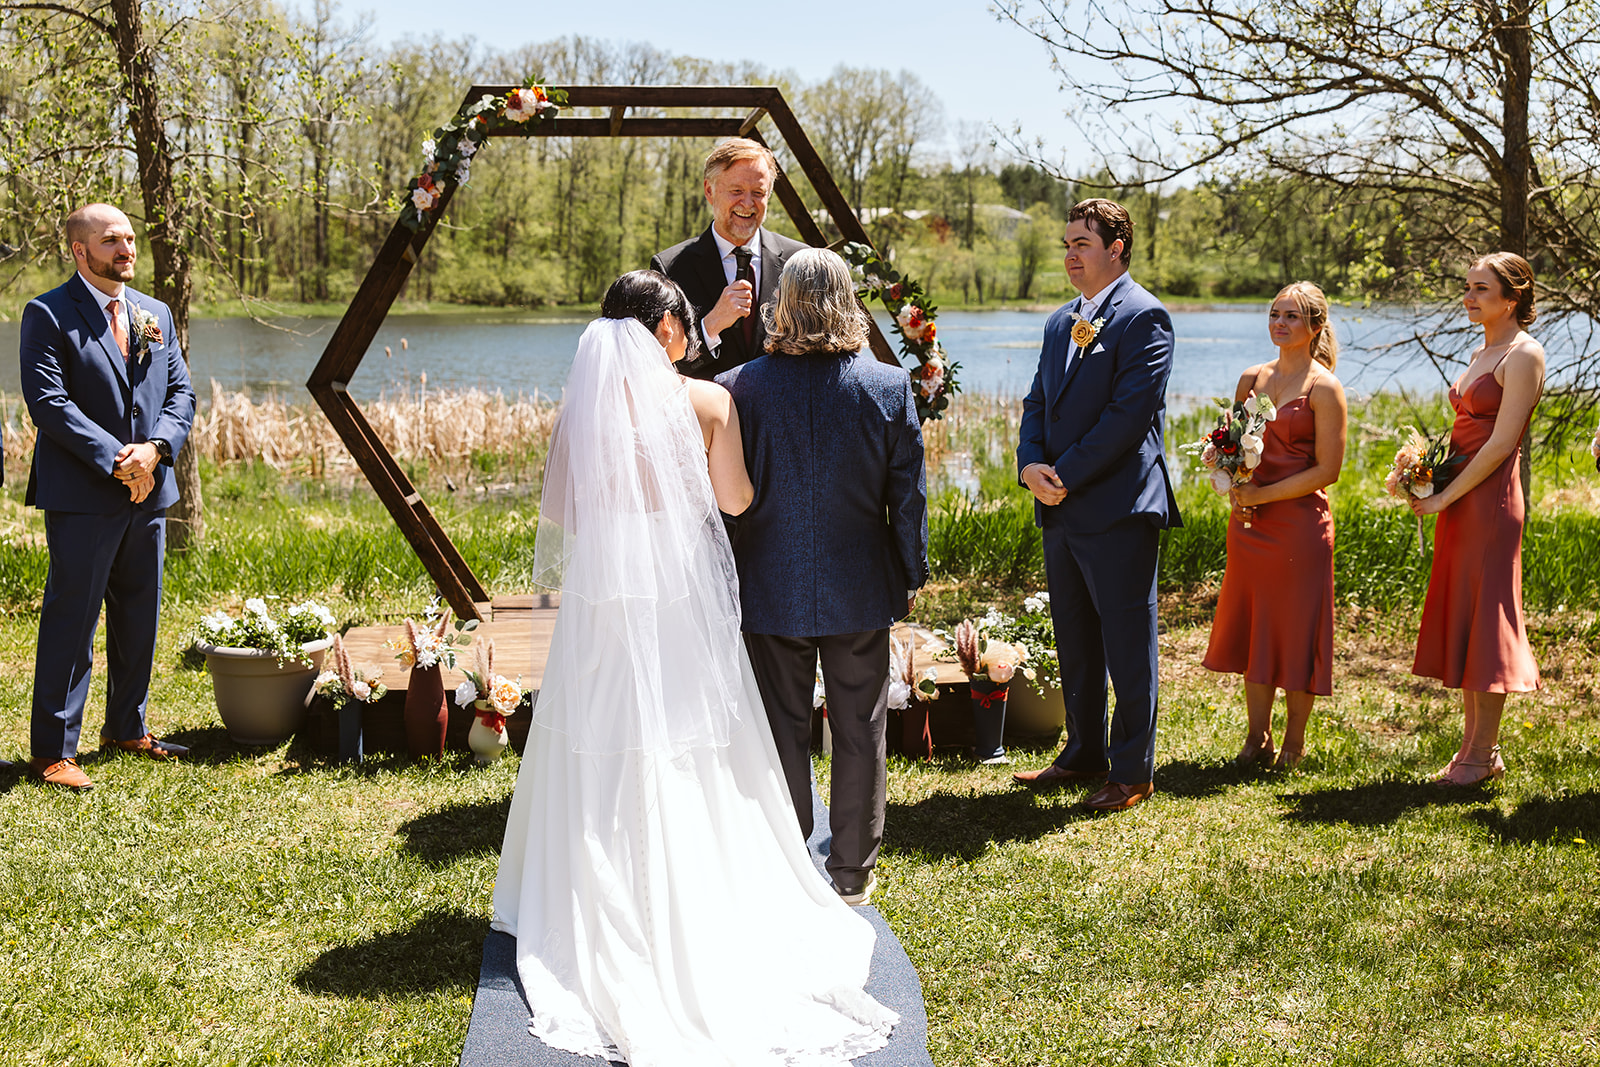 An intimate Northern Minnesota wedding took place along a lakefront resort.